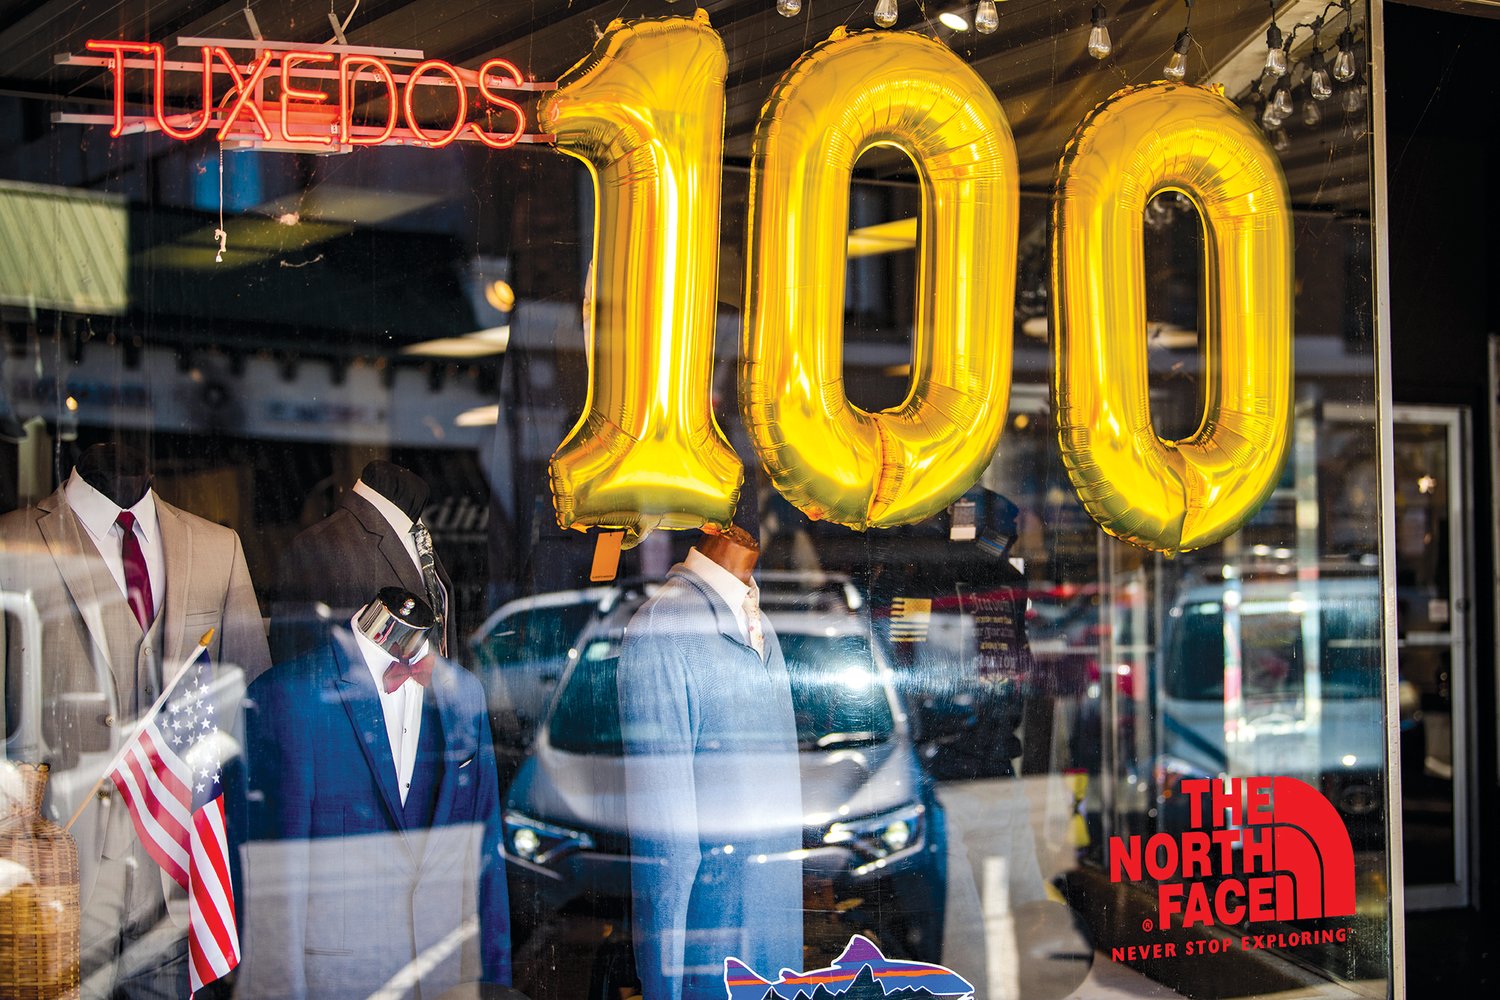 Suits and balloons are displayed behind glass at Bartel's in Chehalis for the 100 year celebration.